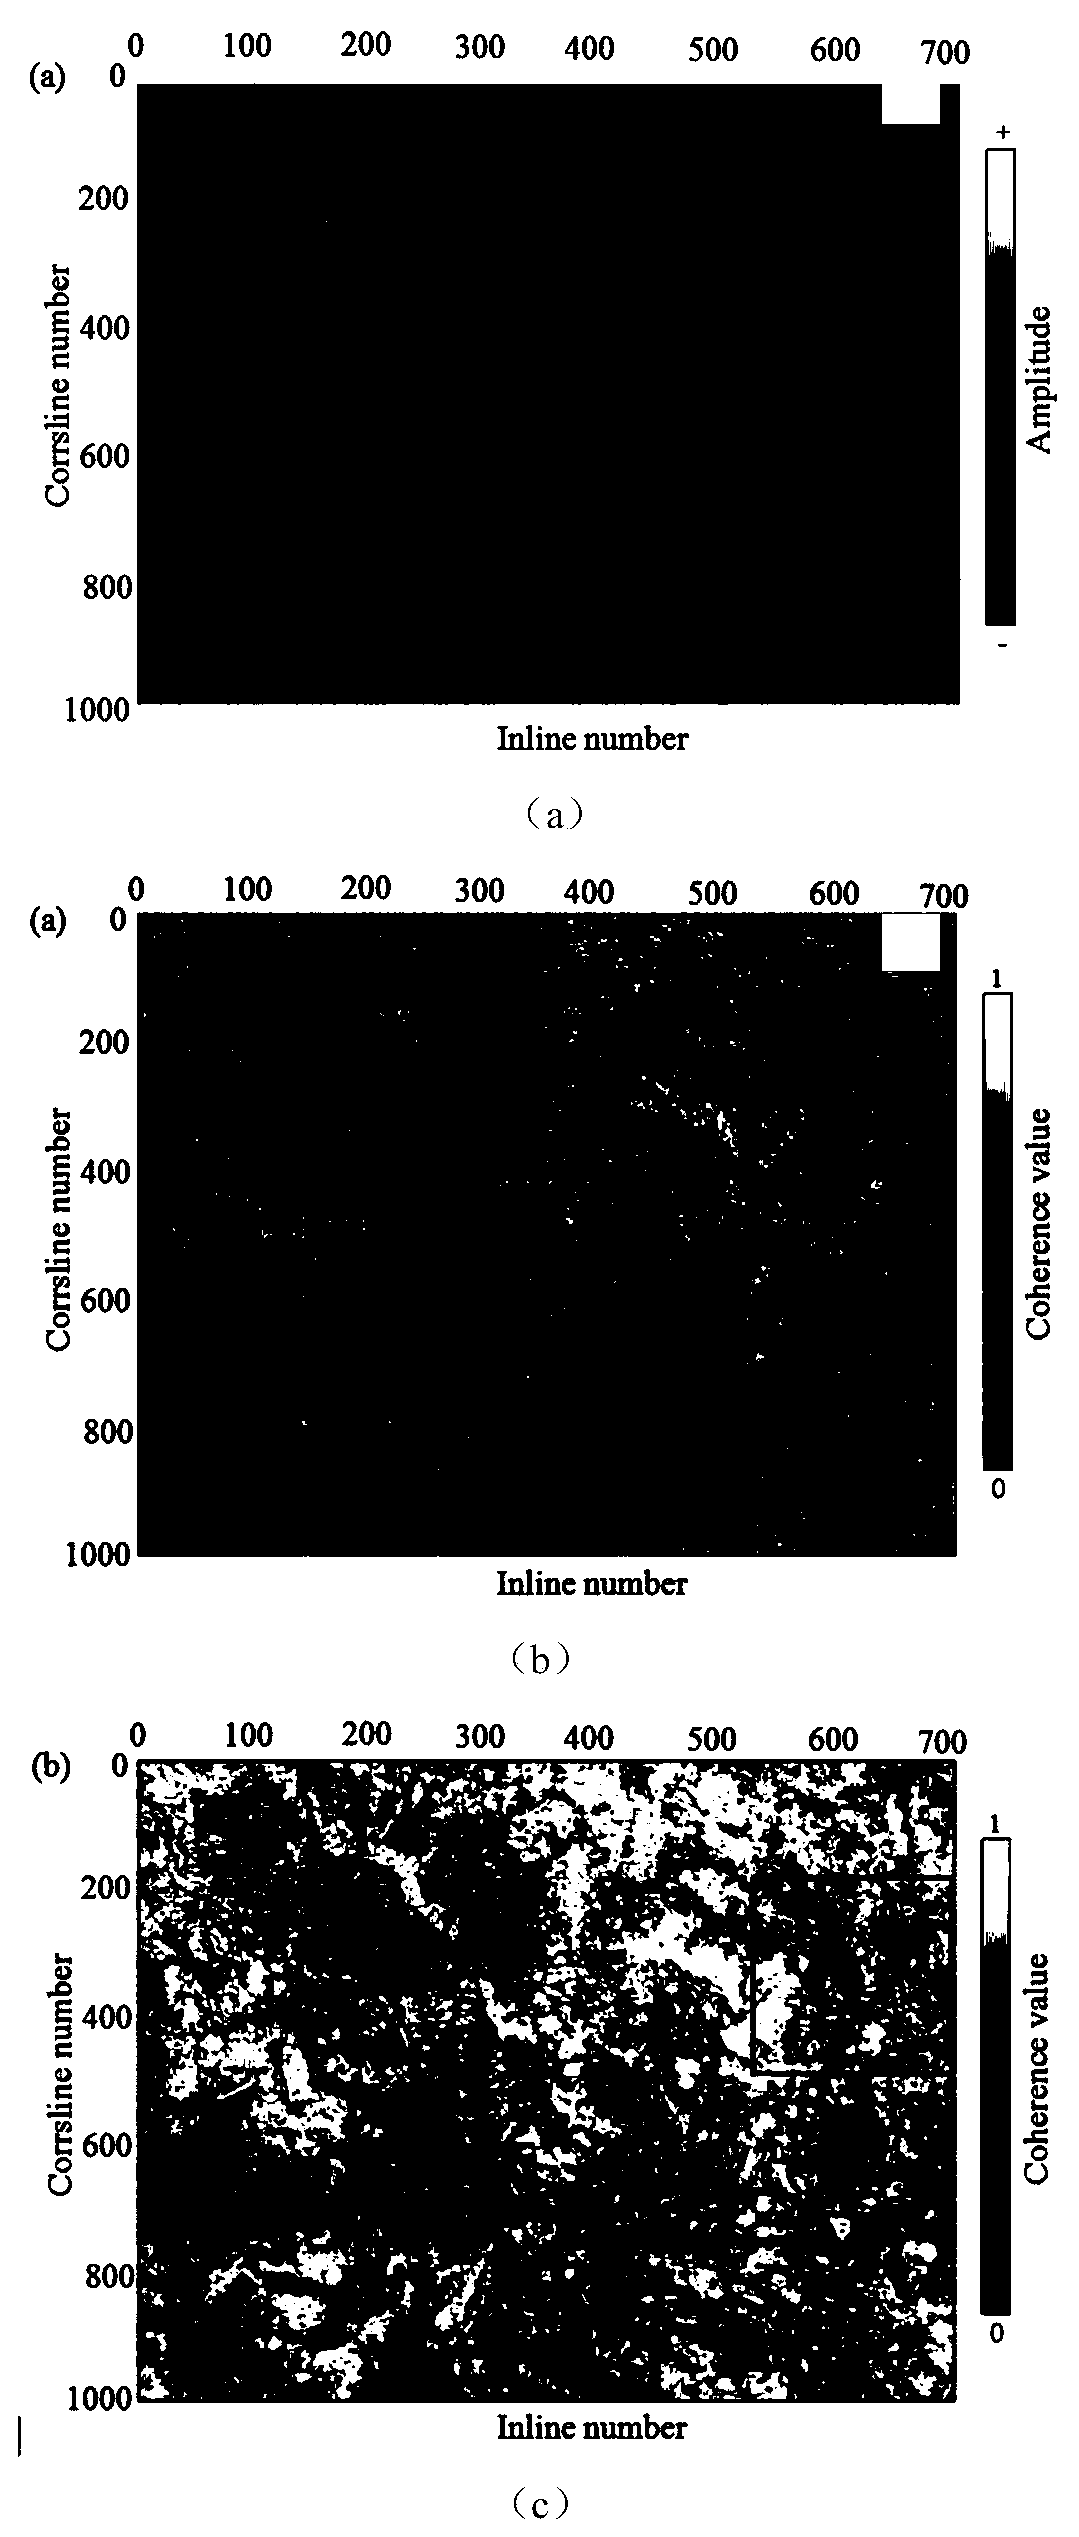 A Method of Seismic Data Attribute Extraction Based on Kernel Correlation